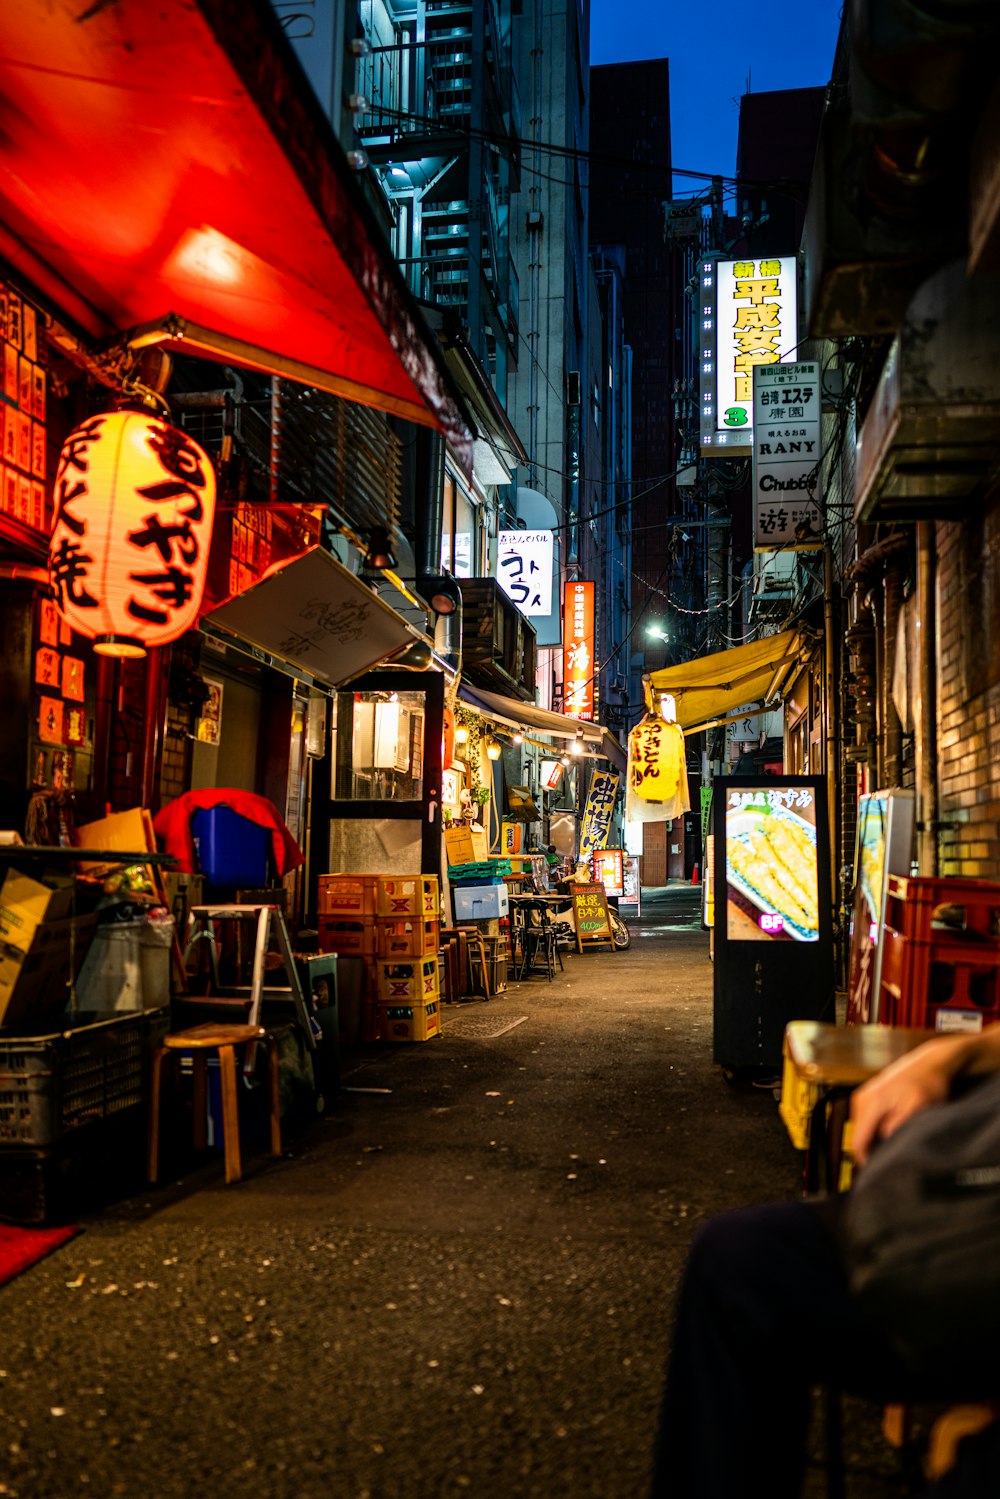 stalls on alley at night